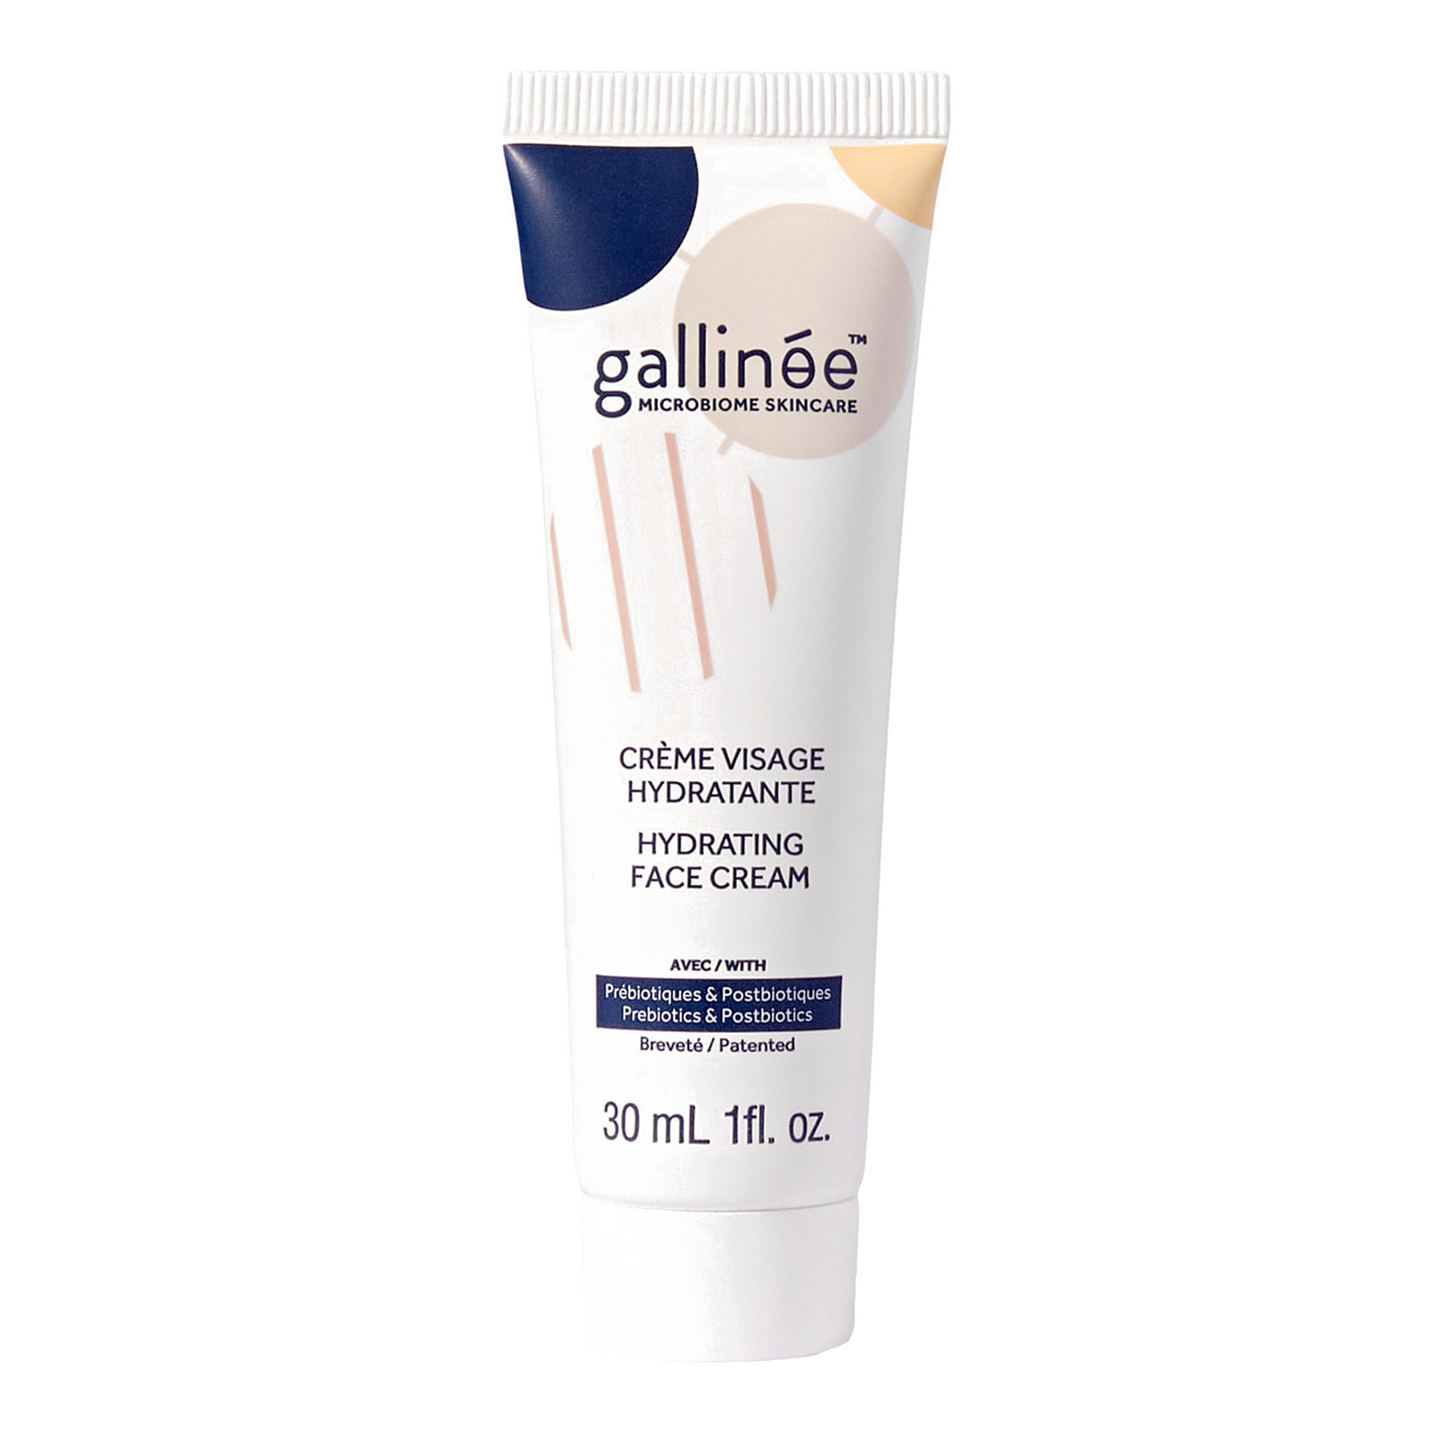 Gallinee Probiotic Face Cream: A concentrate of probiotics, prebiotics and postbiotics to repair the skin barrier and support the microbiome.  This soothing moisturiser leaves your face soft, plump and glowing.